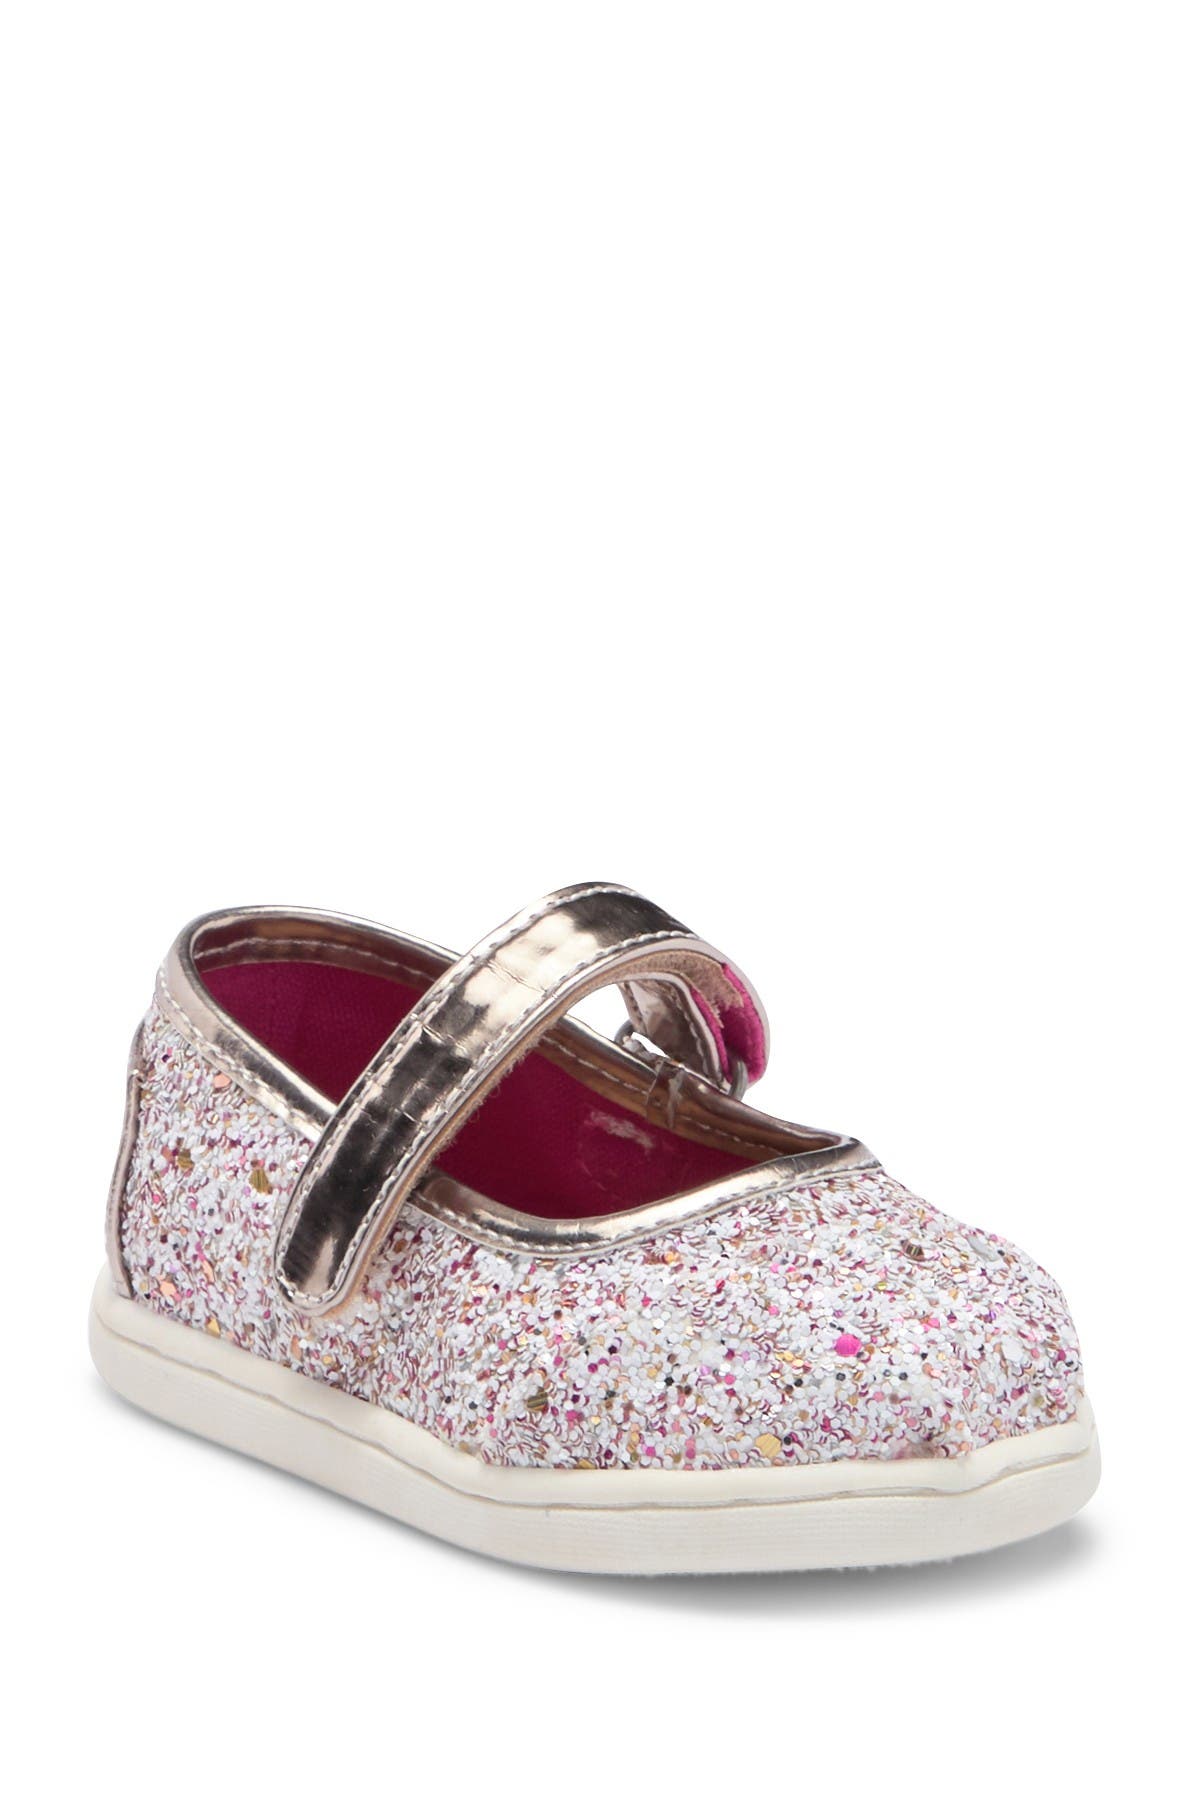 candy cane glitter toms